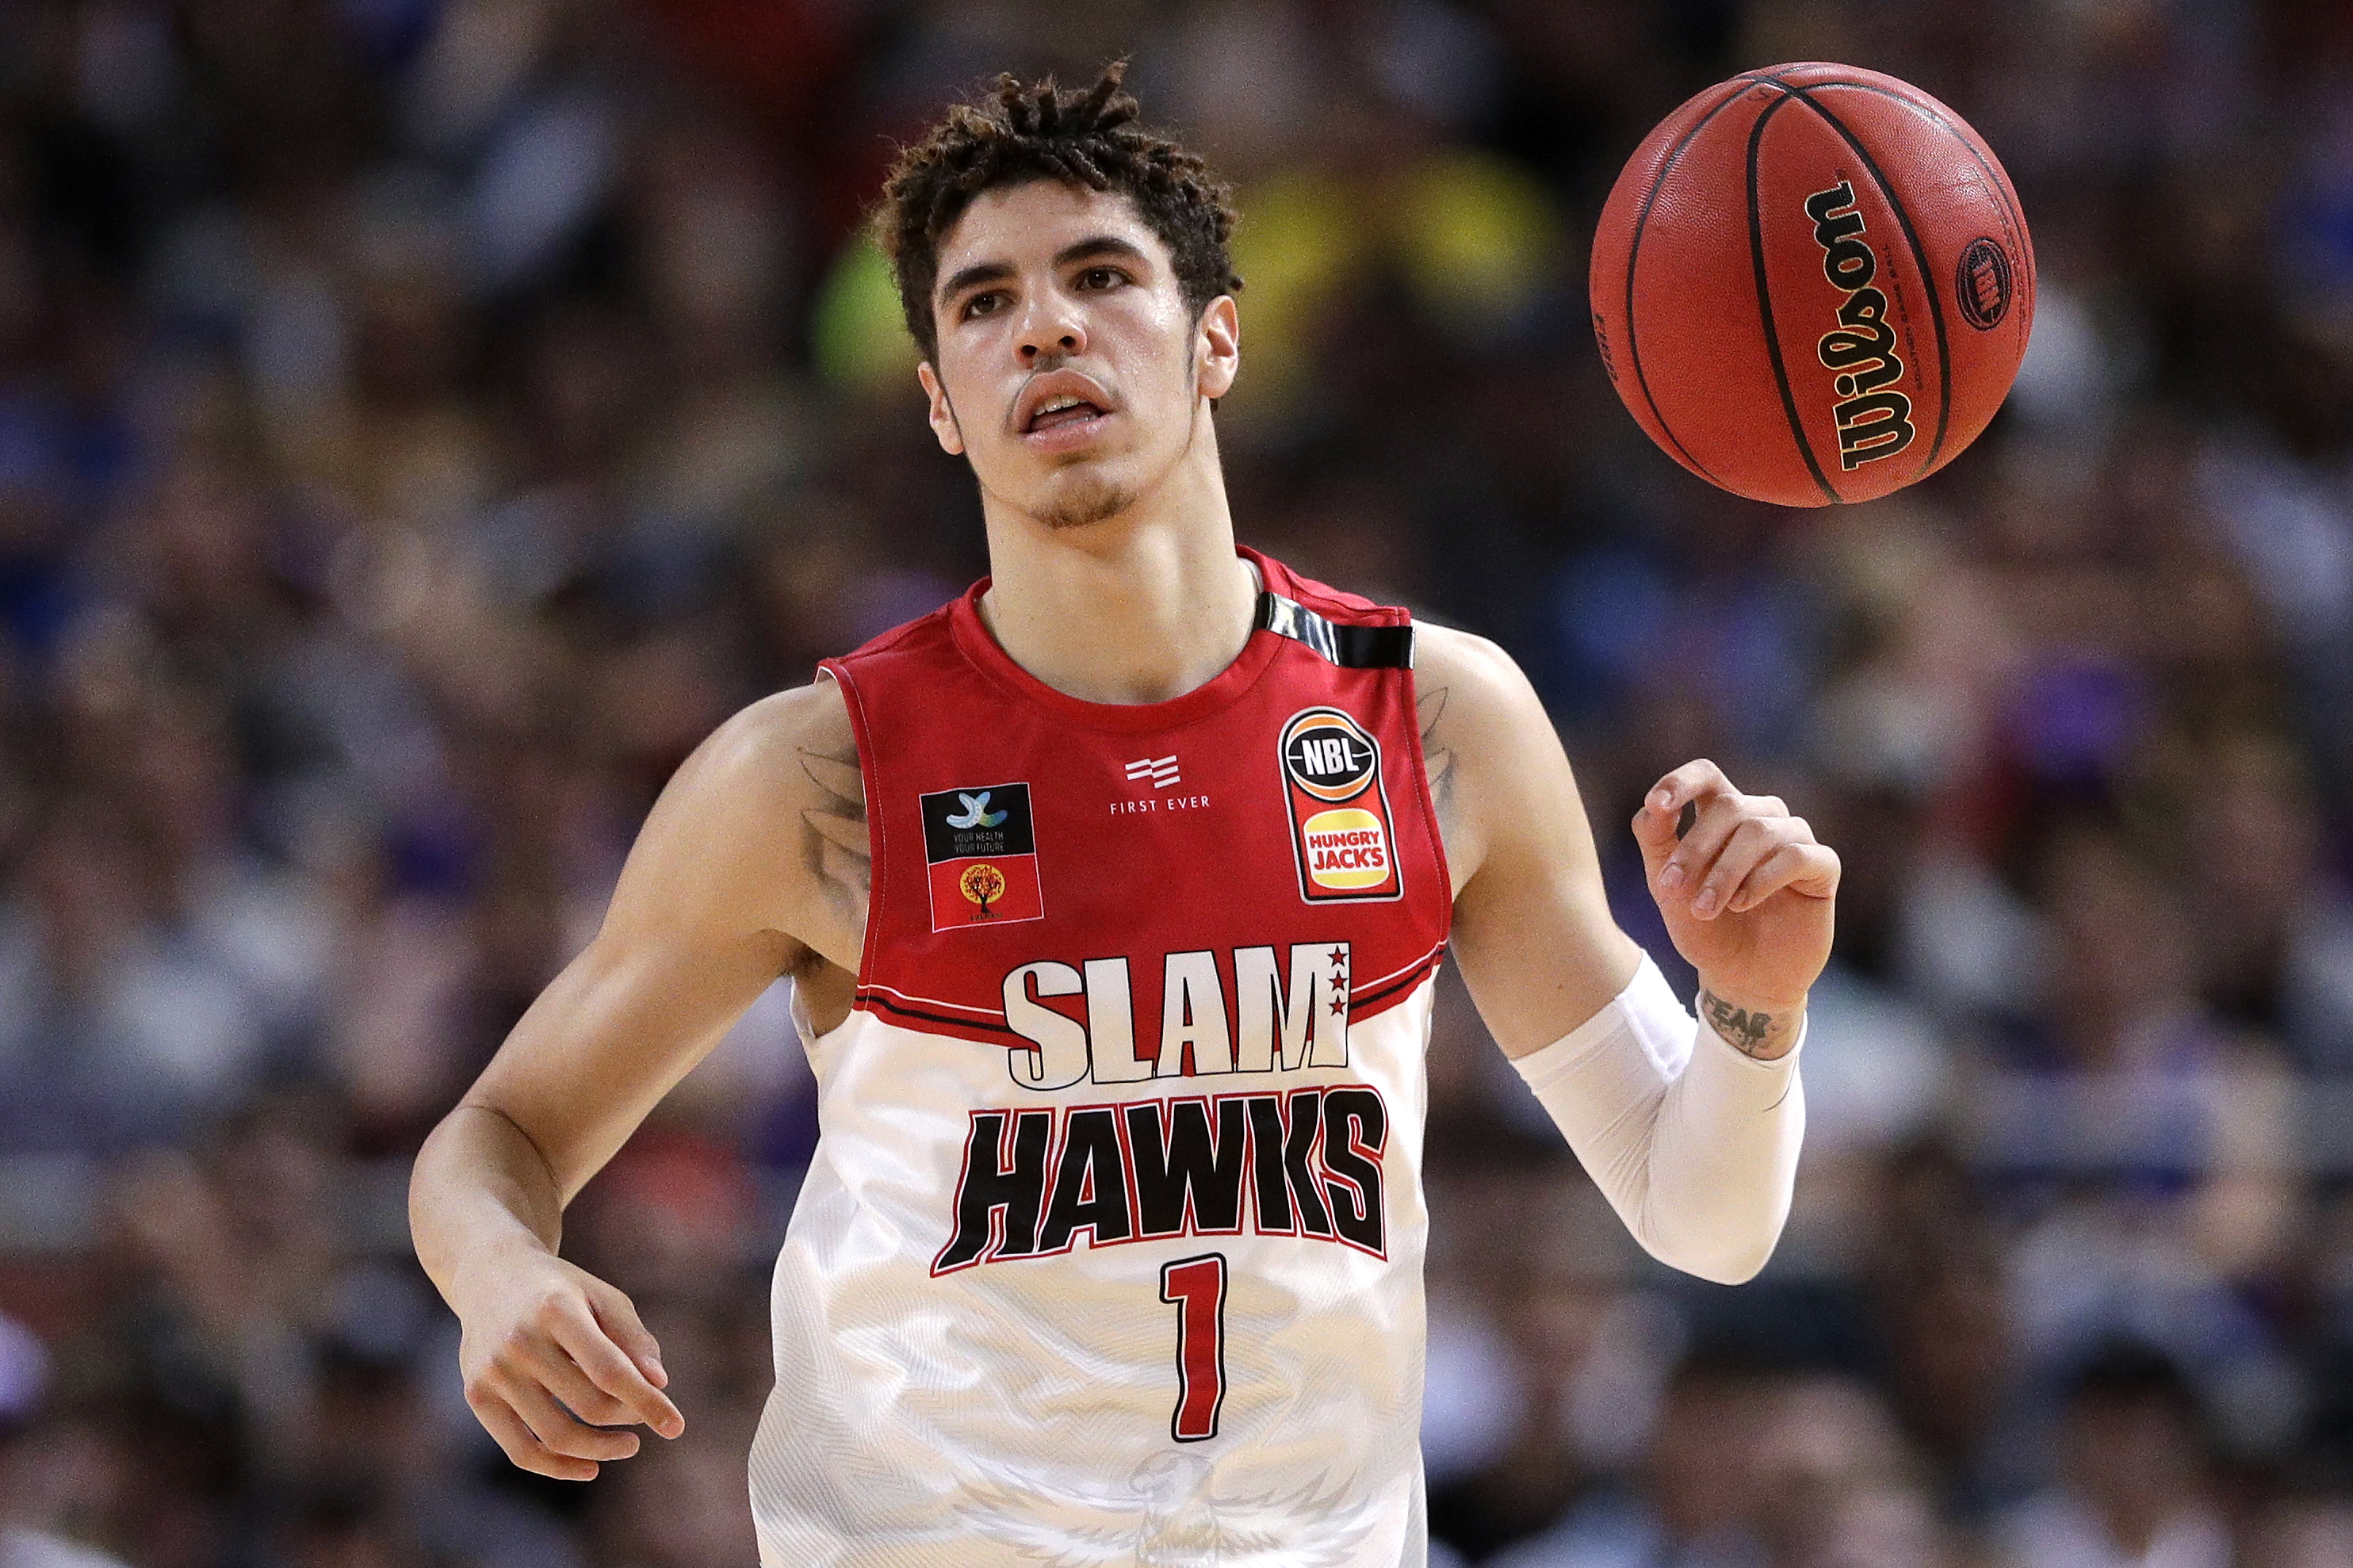 2020 Nba Mock Draft Top Prospects With Highest Ceilings At Pro Level Bleacher Report Latest News Videos And Highlights